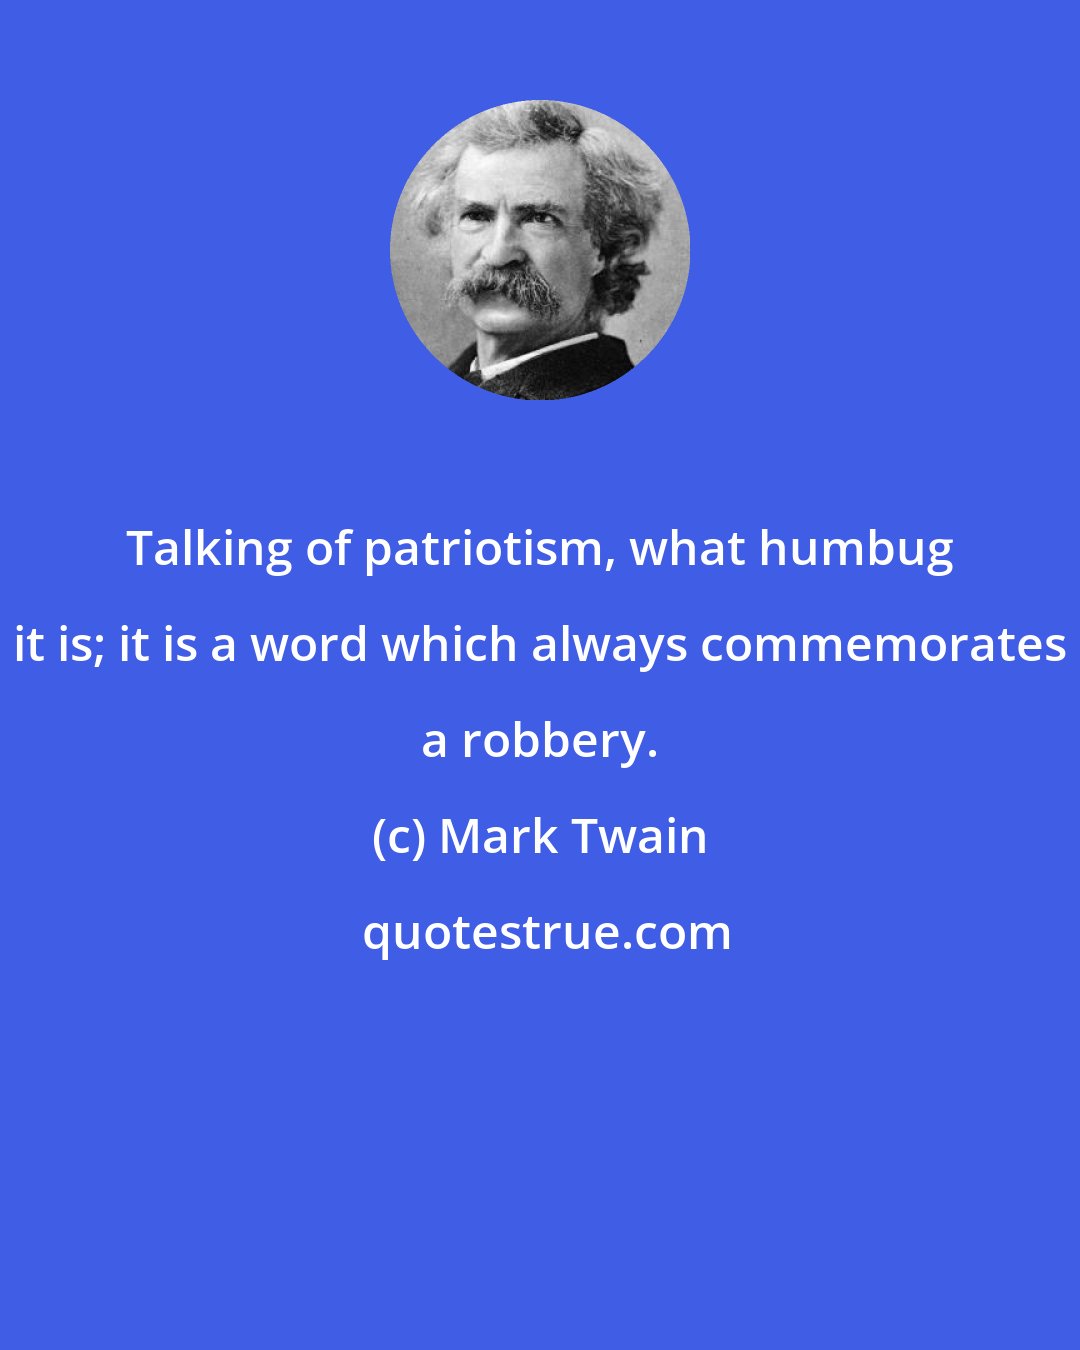 Mark Twain: Talking of patriotism, what humbug it is; it is a word which always commemorates a robbery.